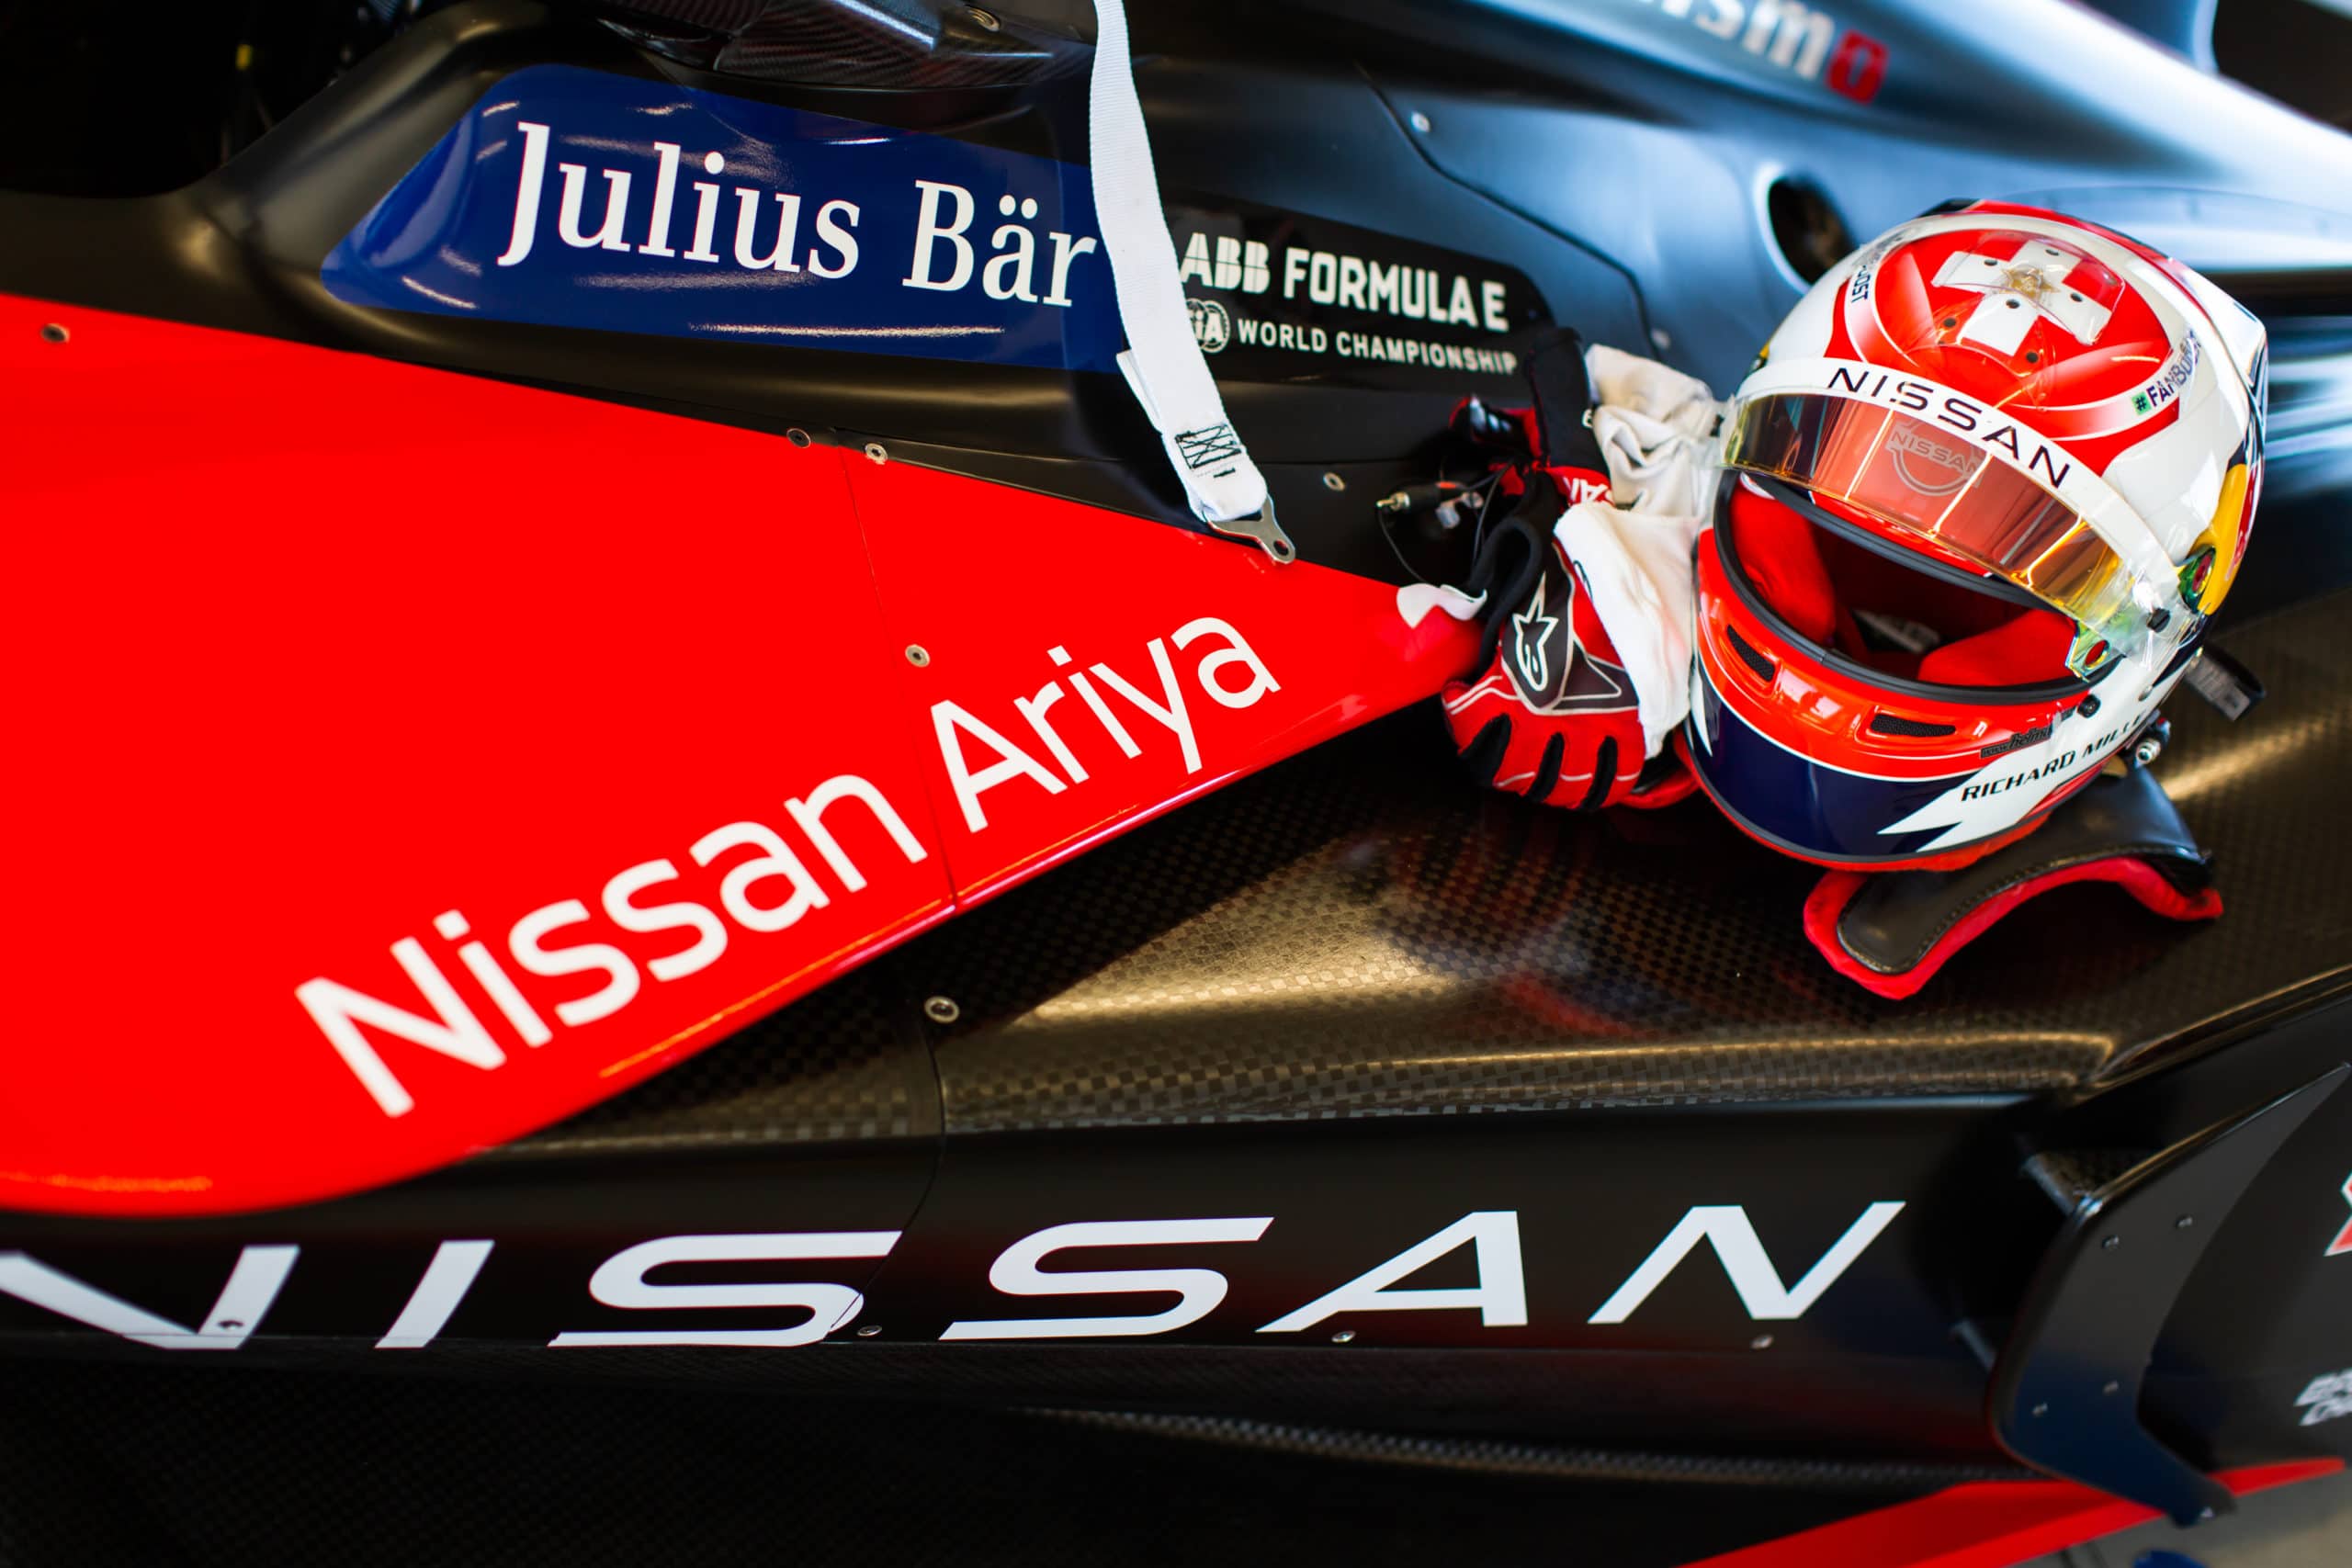 Nissan to bring more Formula E racing excitement through 2026